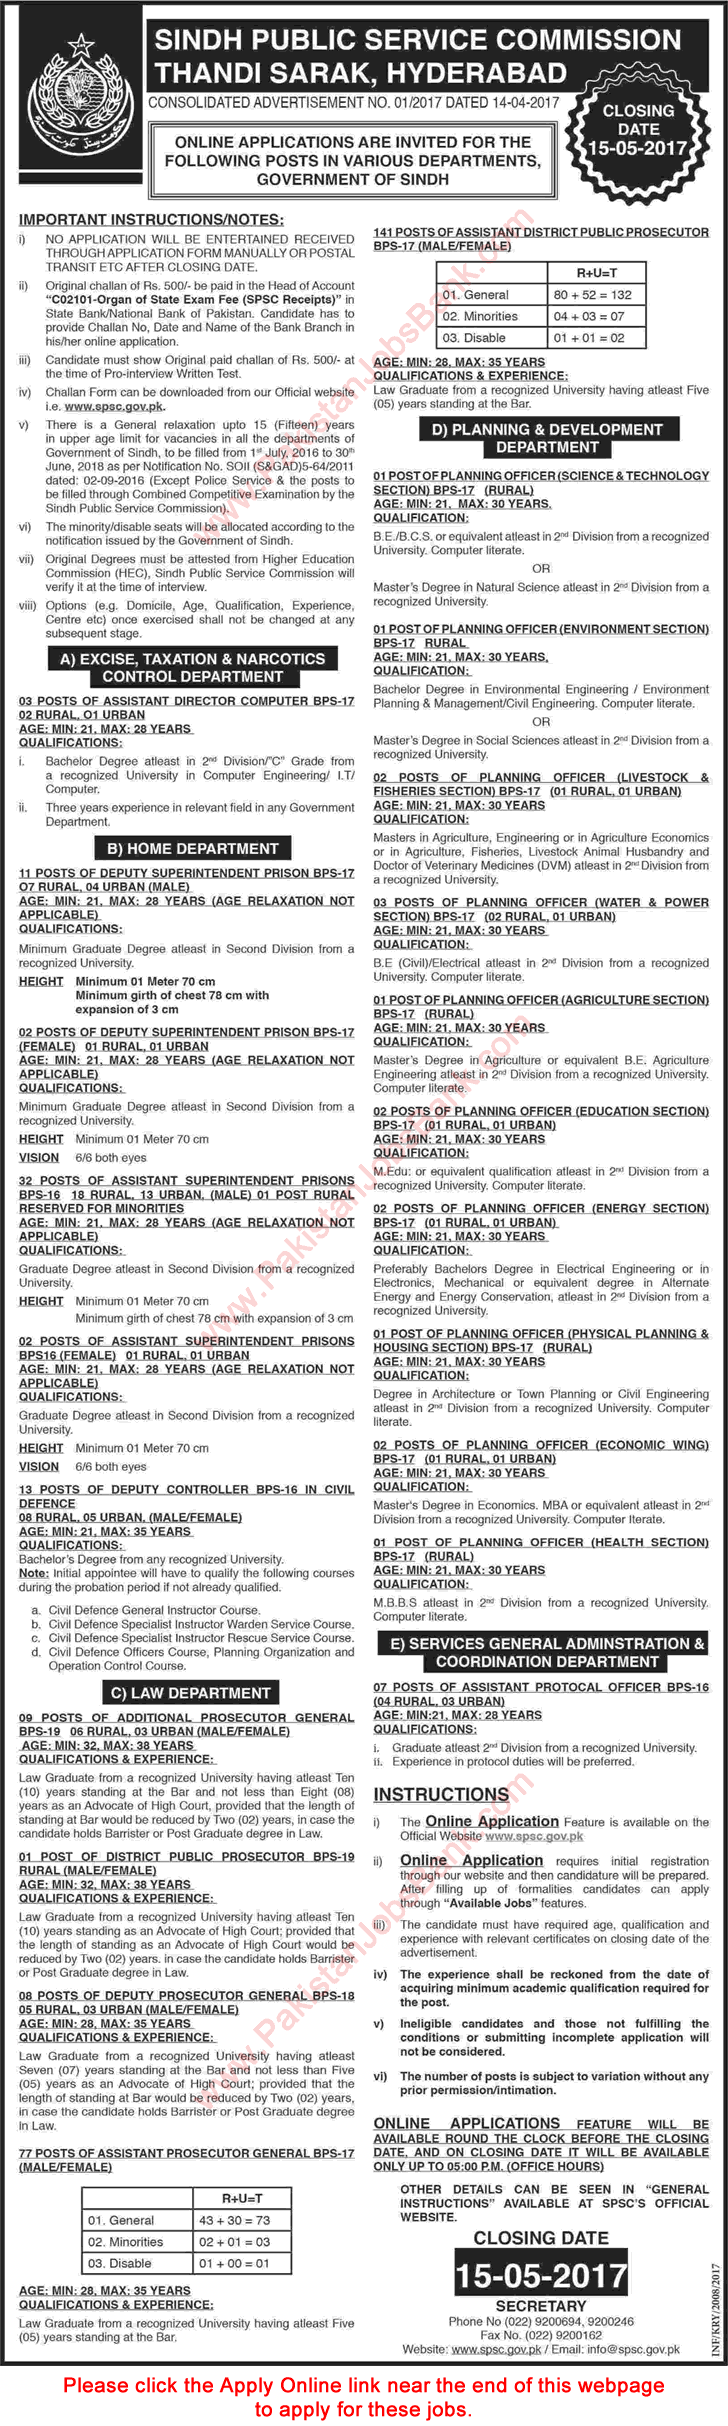 SPSC Jobs April 2017 Apply Online Consolidated Advertisement No 01/2017 1/2017 Latest